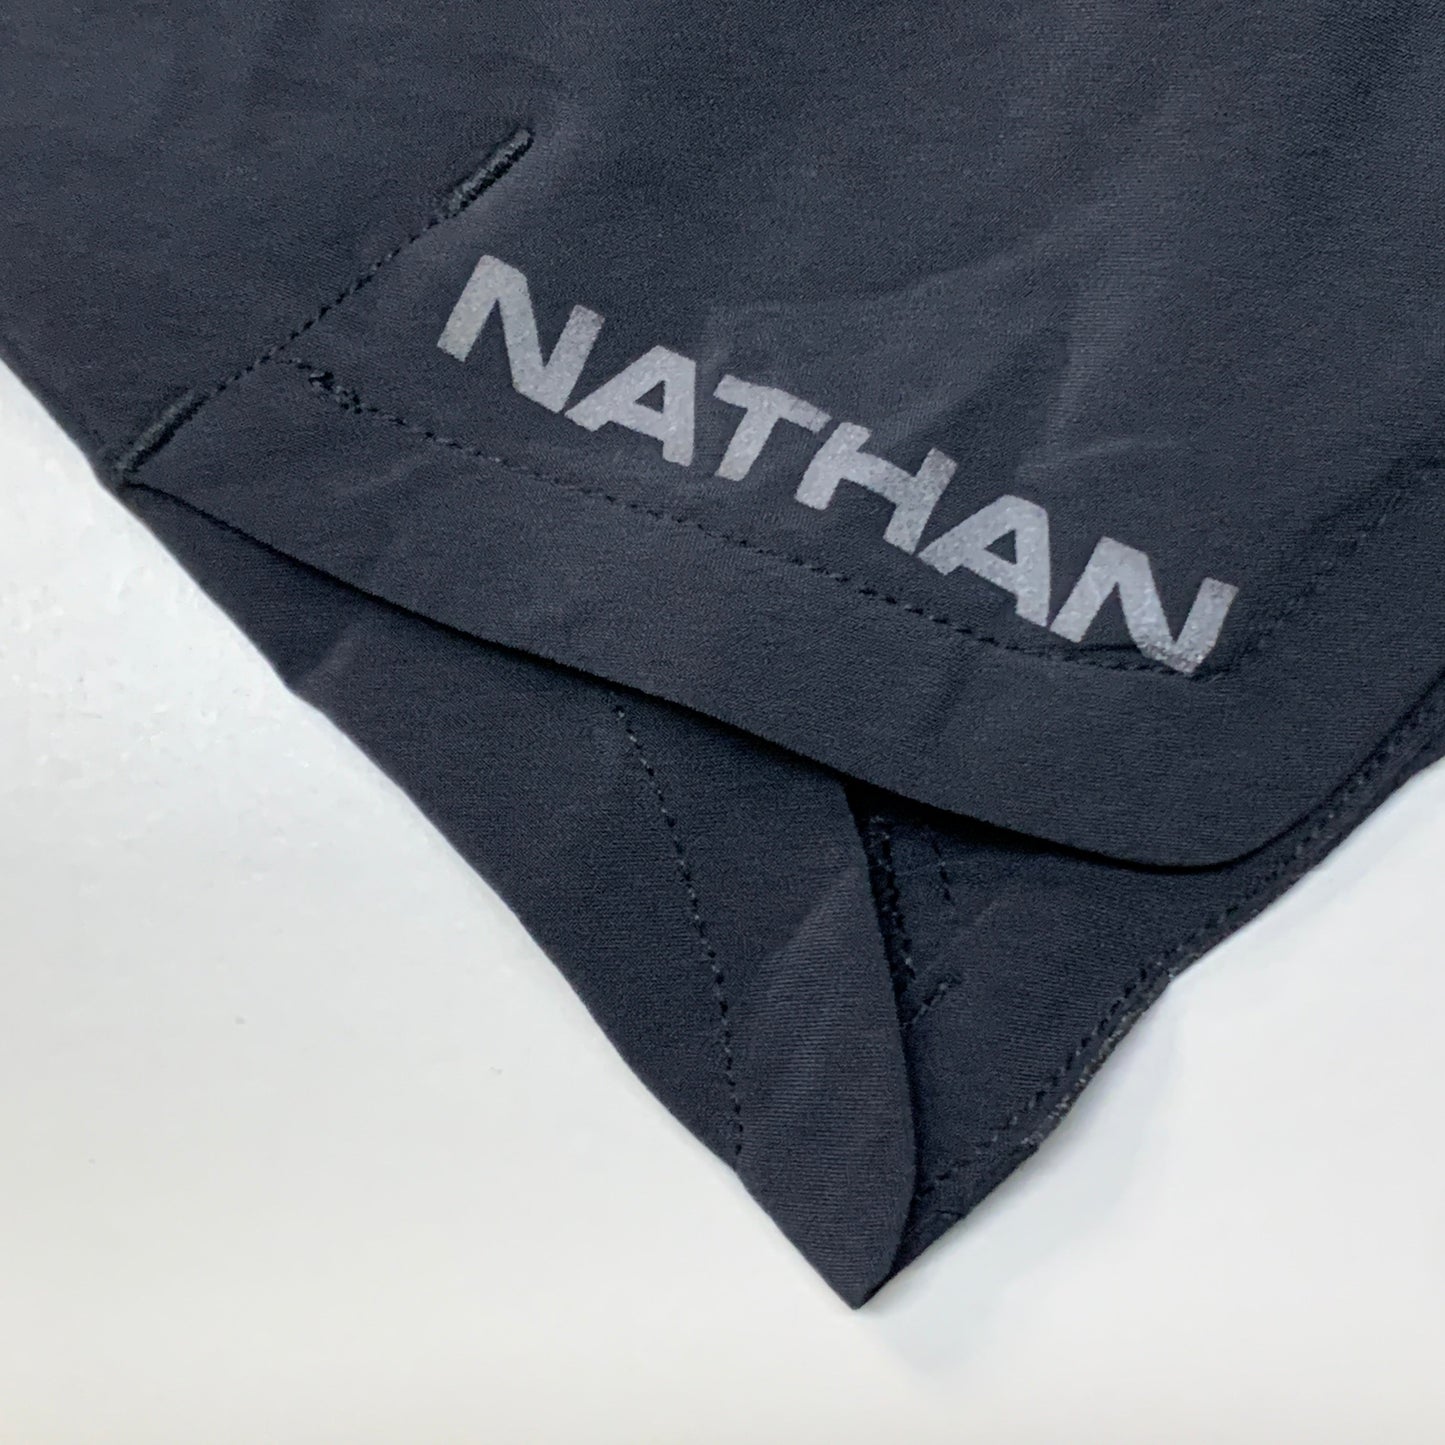 NATHAN Front Runner Shorts 5" Inseam Men's Black Size XS NS70100-00001-XS